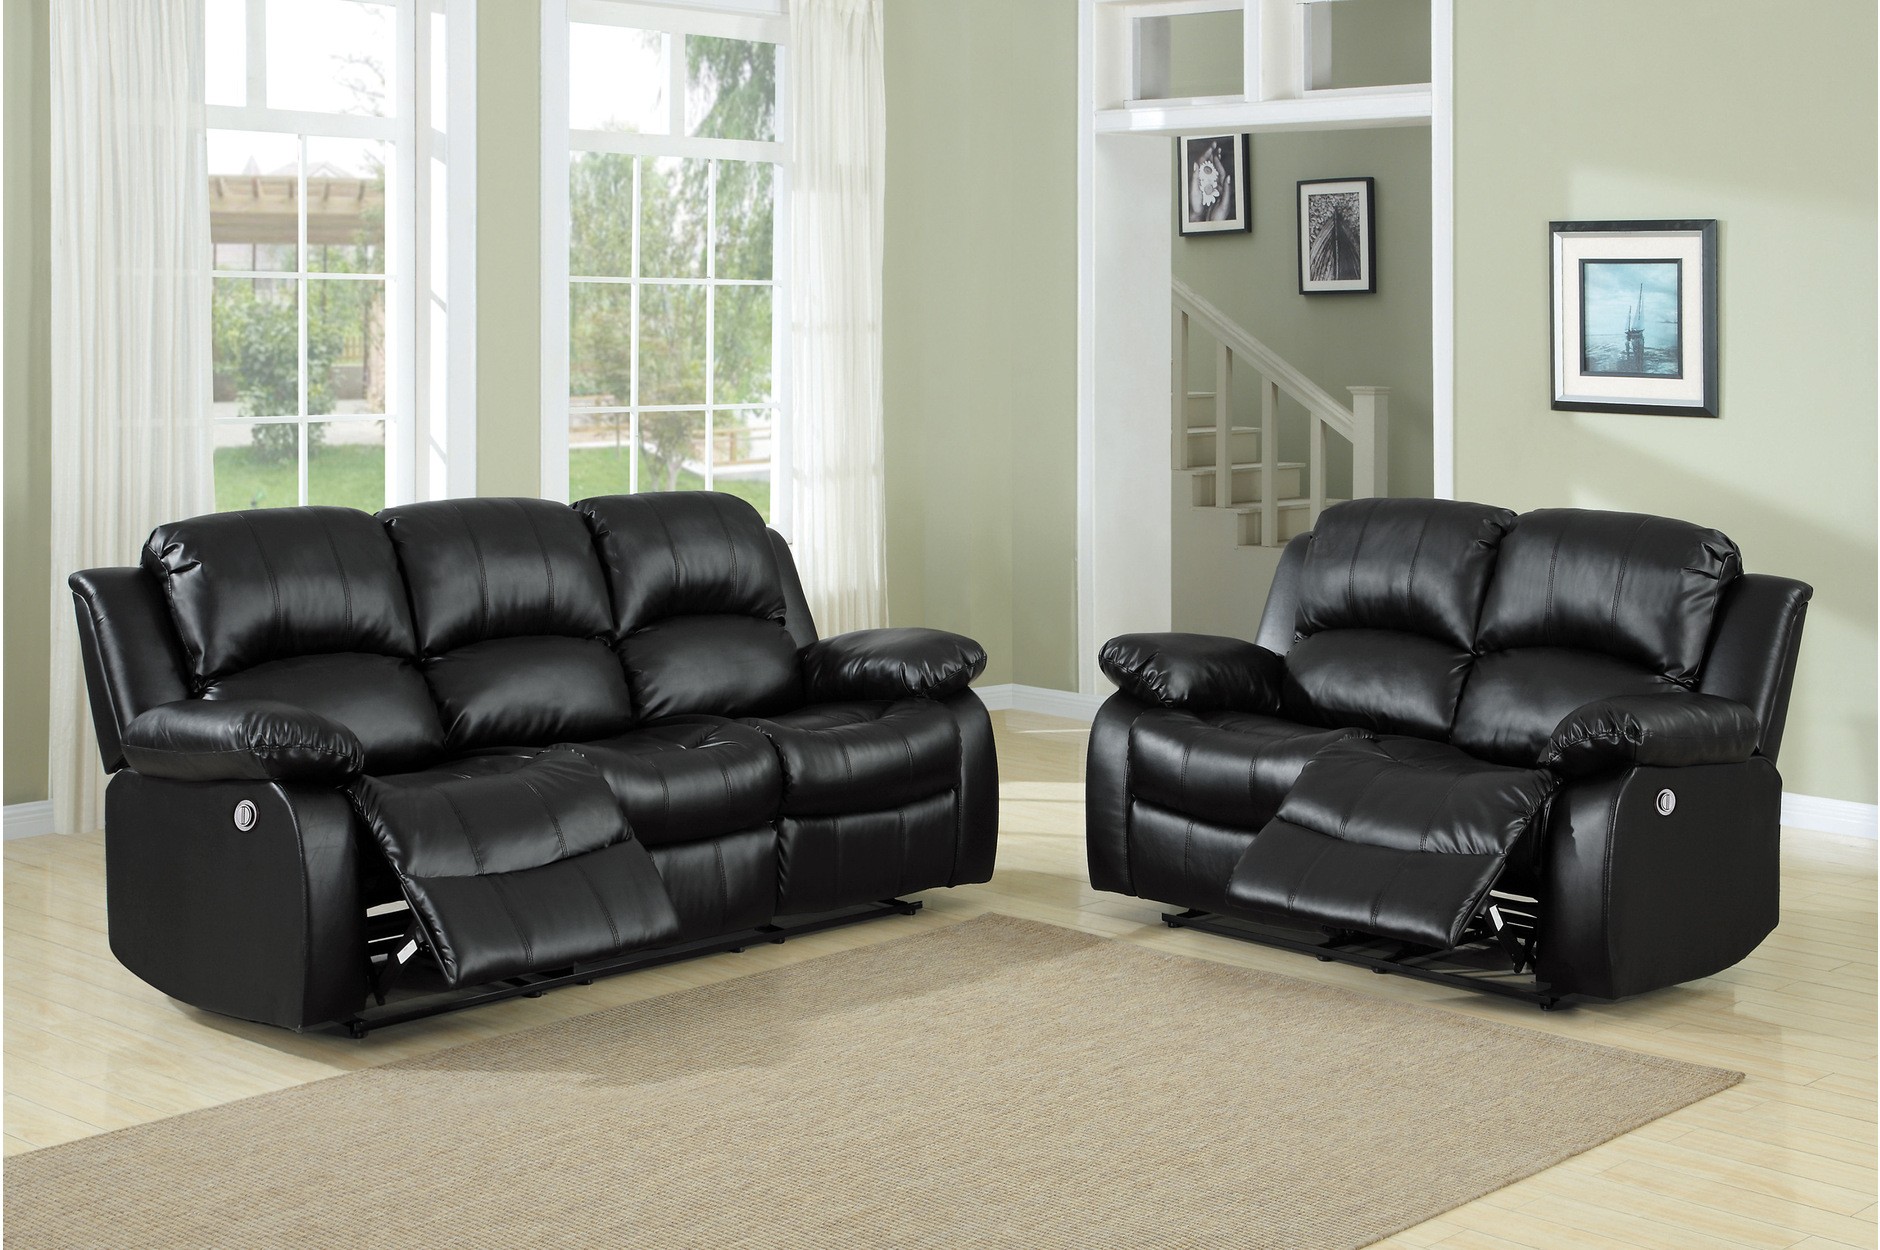 Cranley black small sectional sofa with recliner